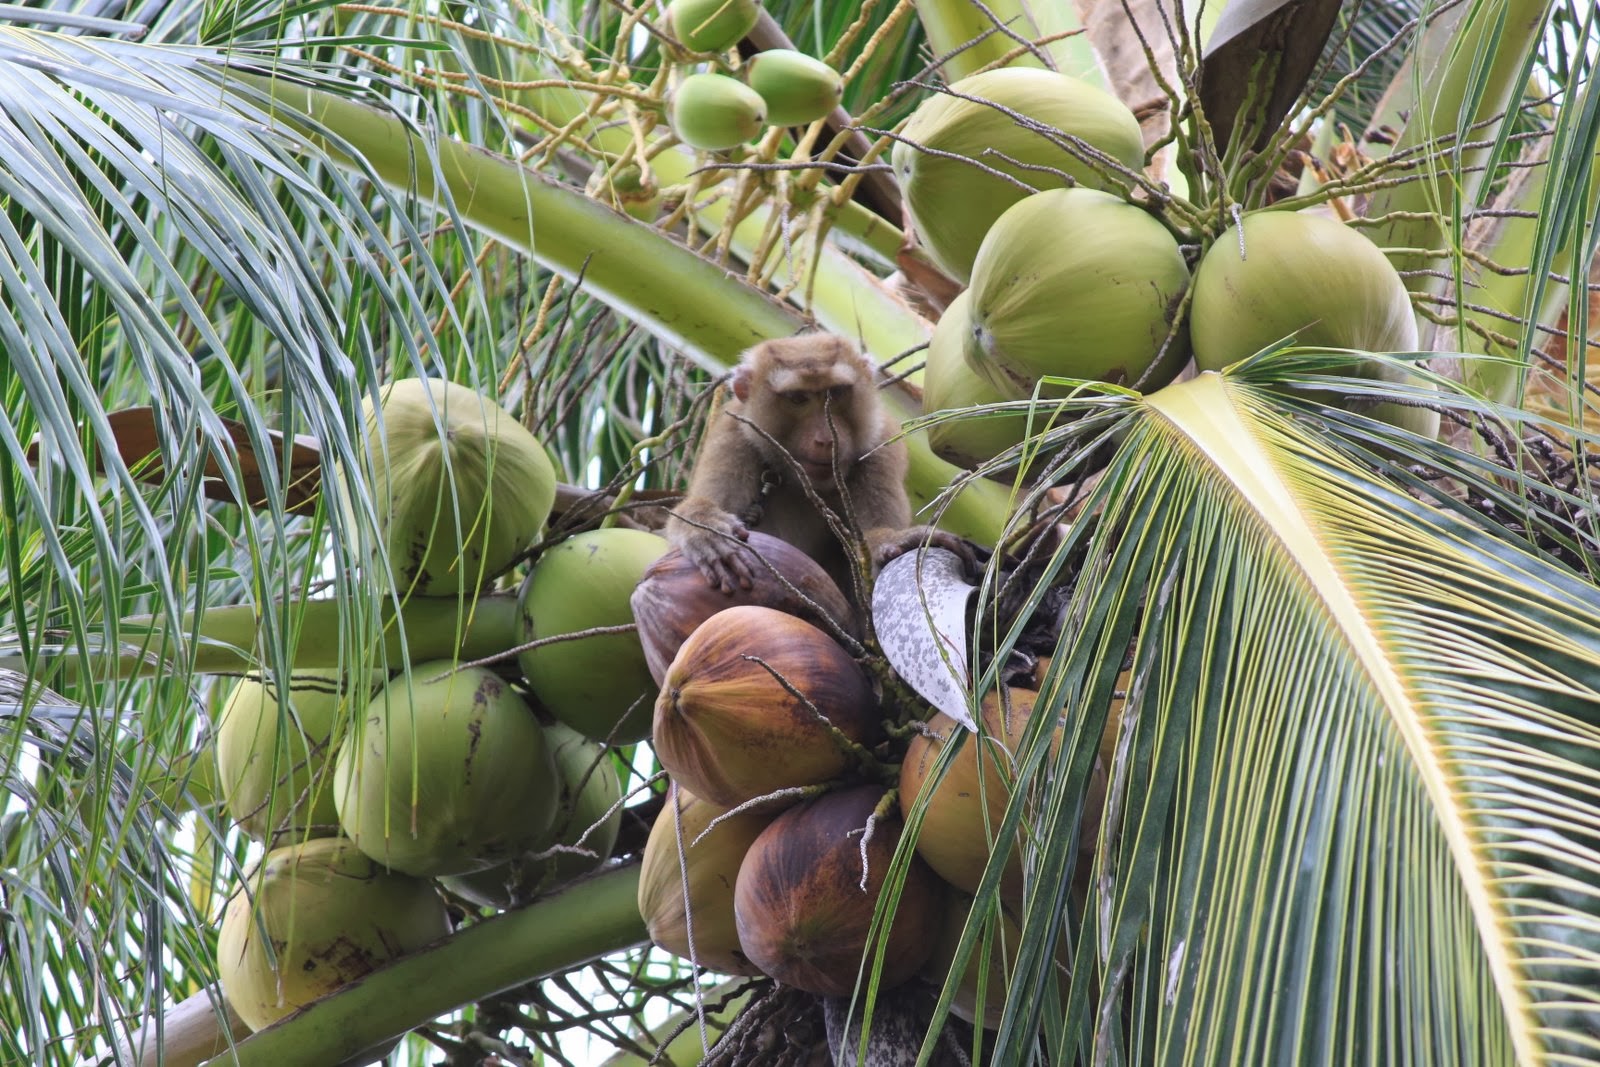 Monkeys Picking Coconuts On The Trees